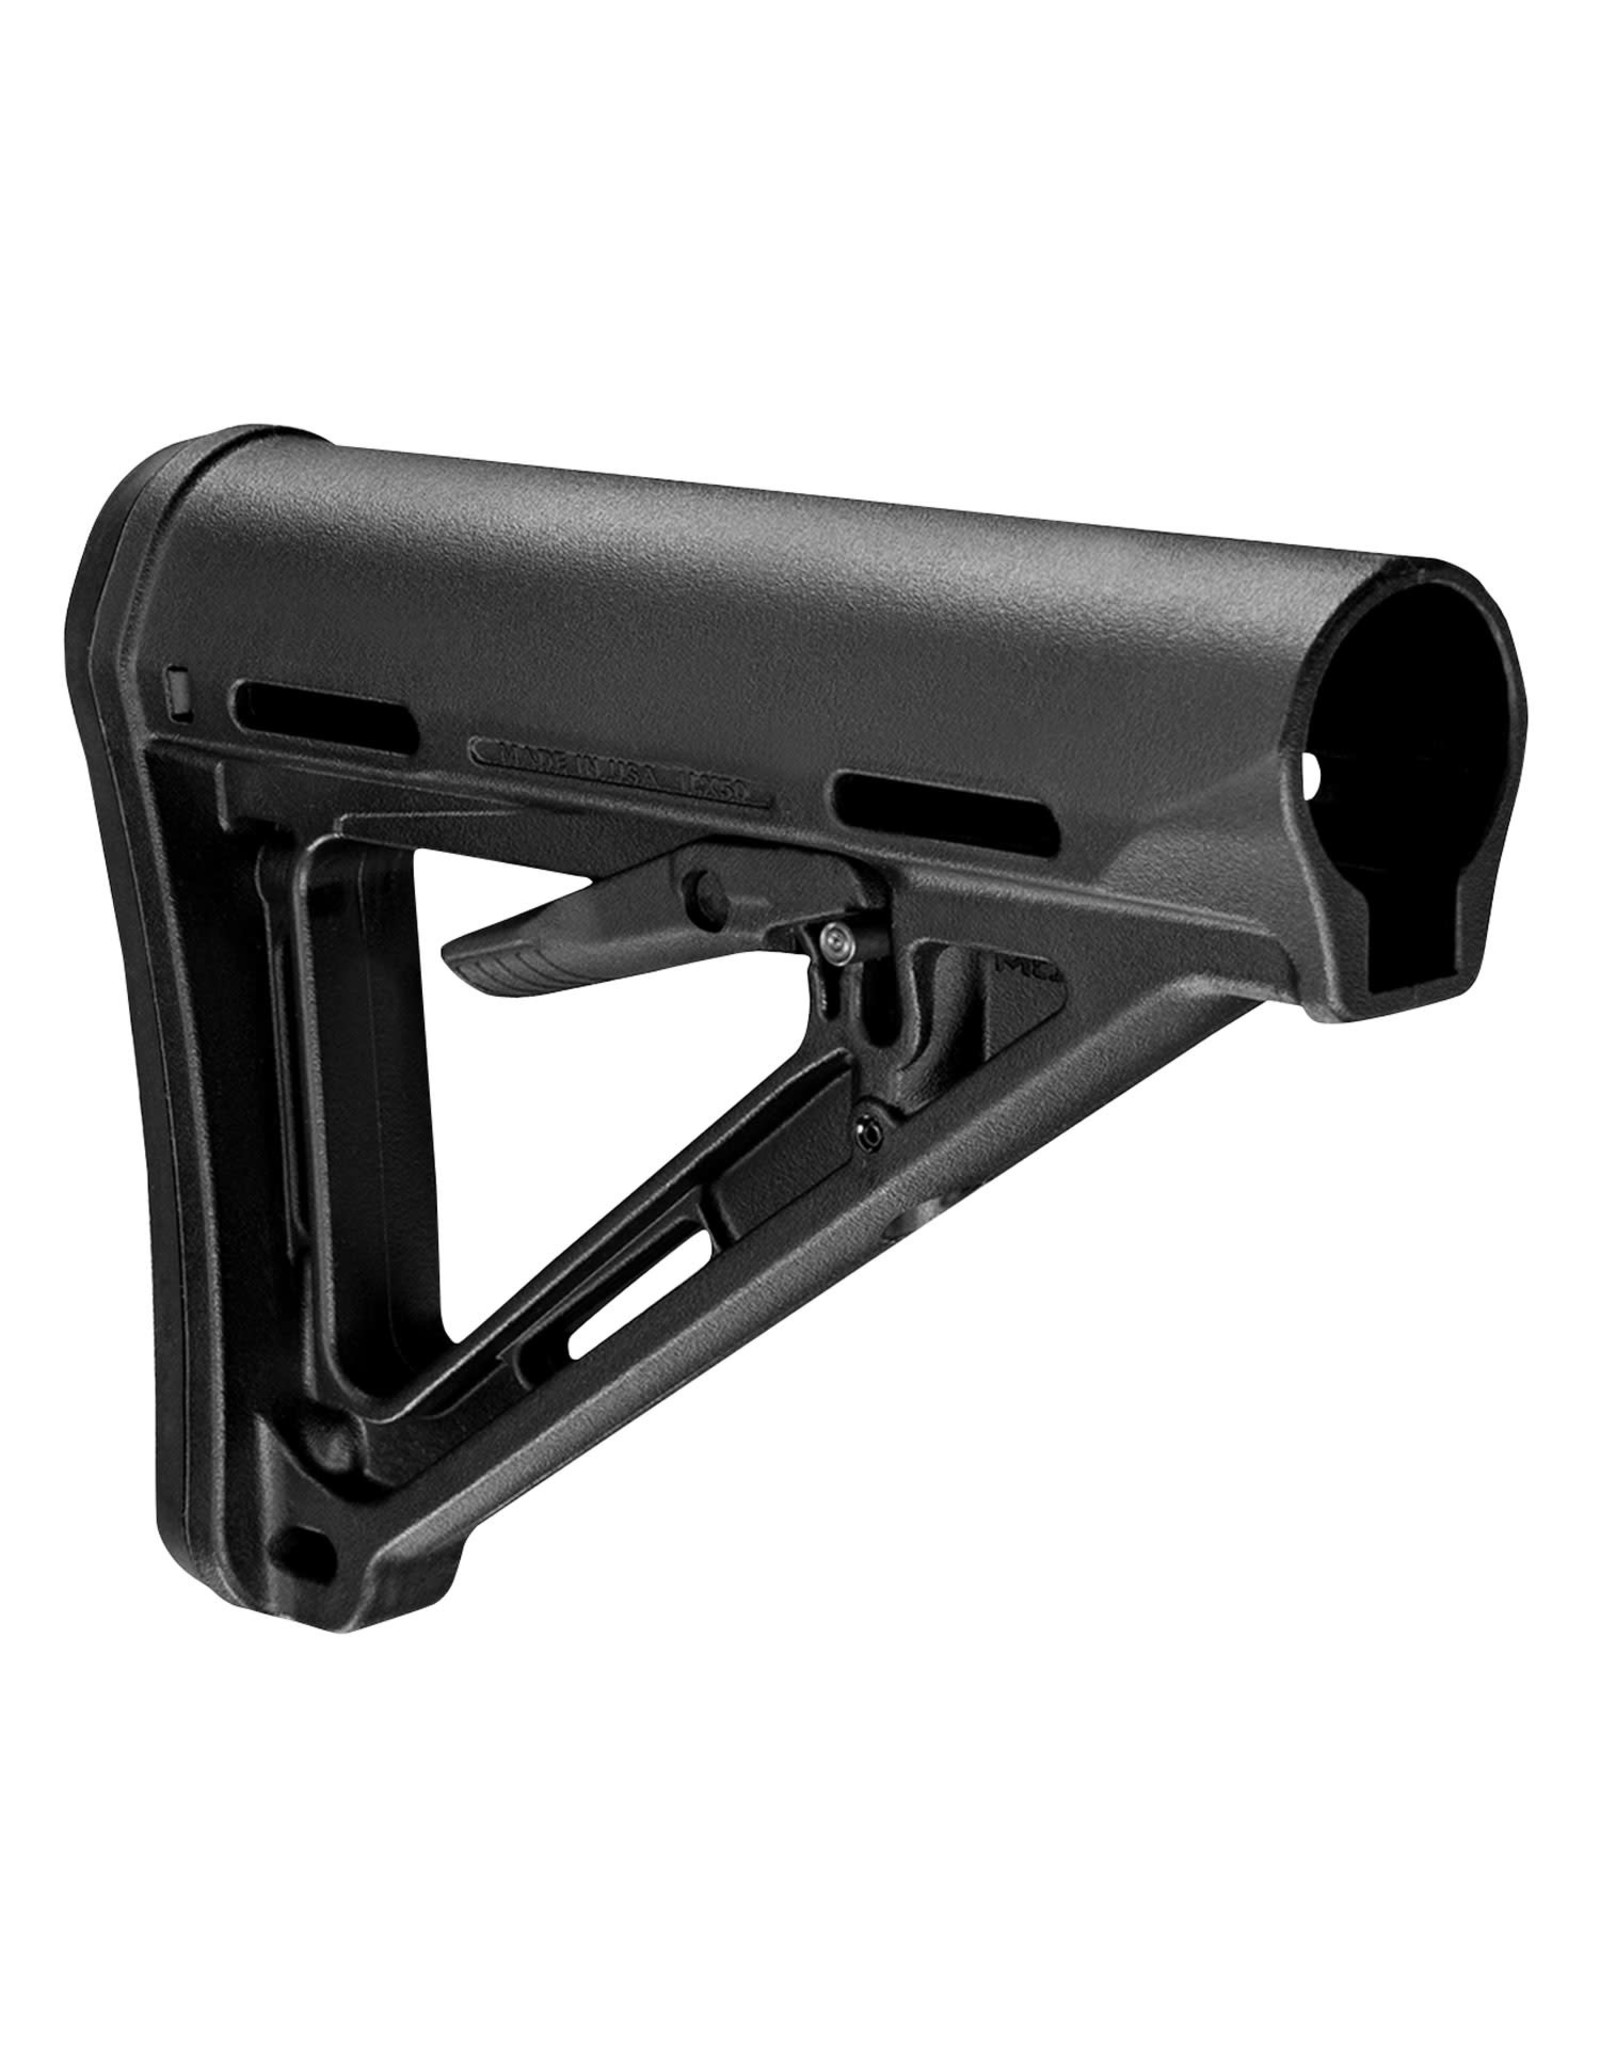 Magpul MOE Carbine Stock Black Synthetic for AR15/M16/M4 Mil-Spec Tube (not included)